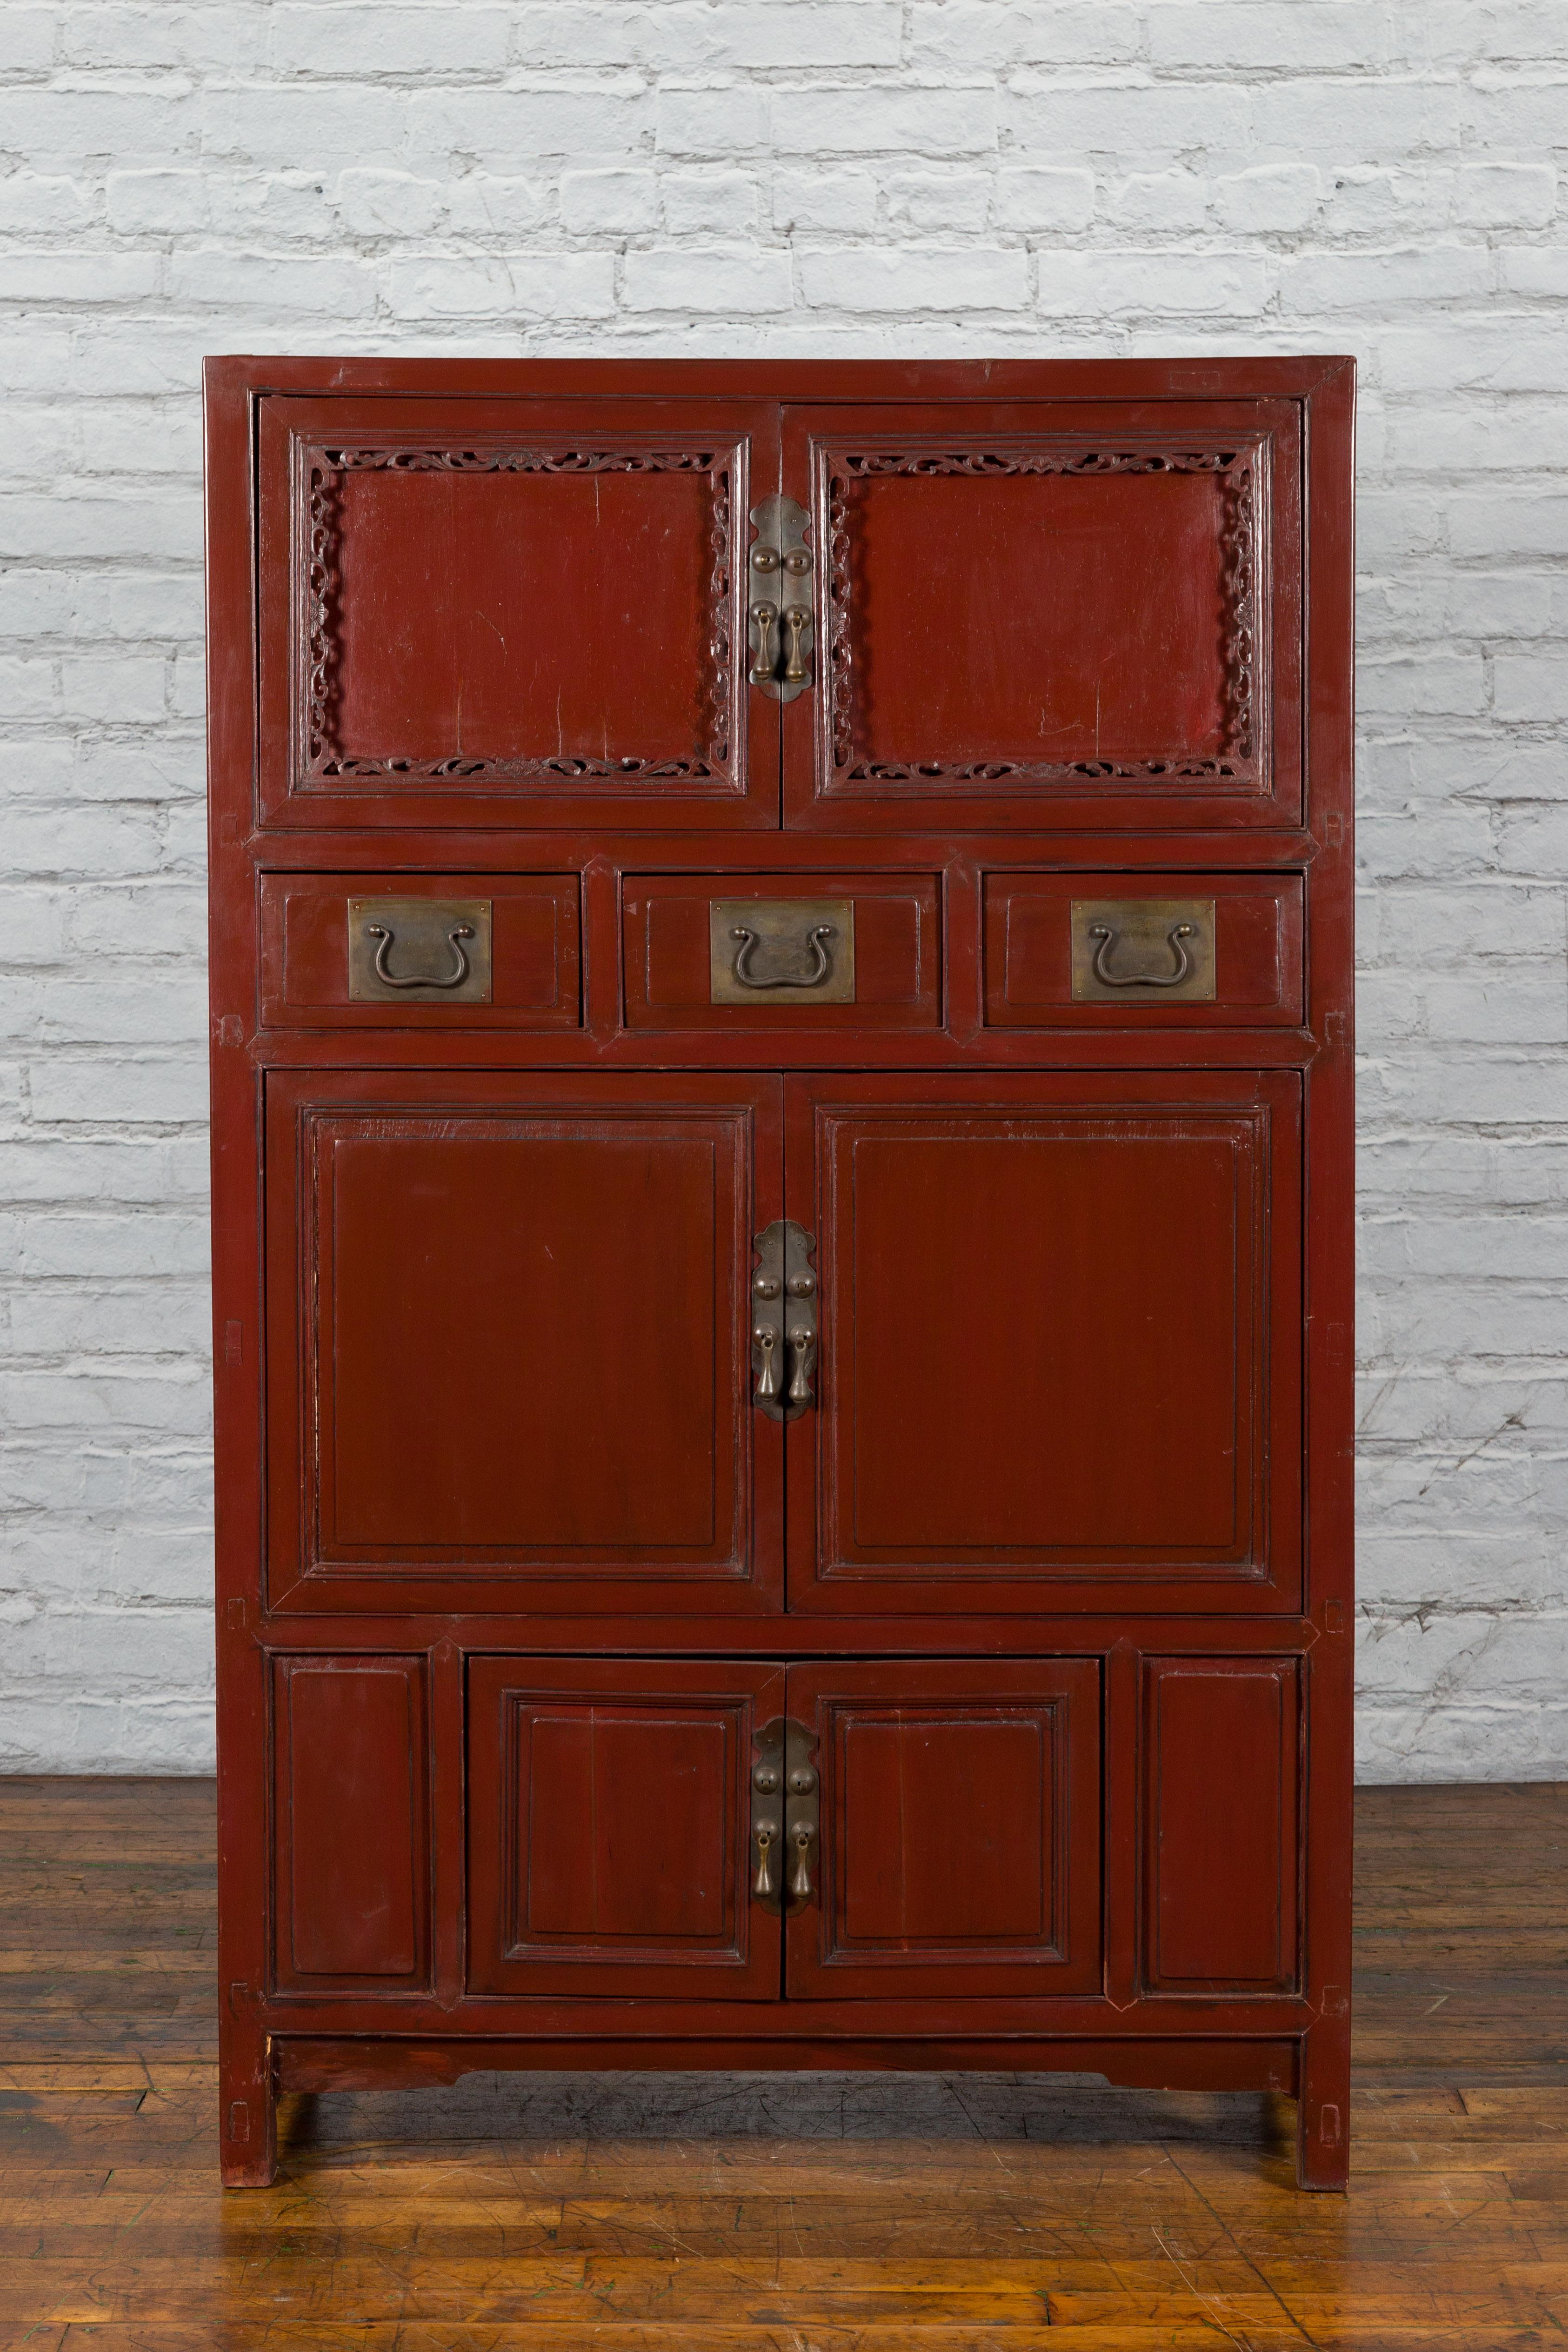 A Chinese Qing dynasty period red lacquer cabinet from the mid 19th century with drawers and doors. Created in China during the Qing Dynasty era, this cabinet features a linear silhouette perfectly complimented by a red lacquer finish. The upper